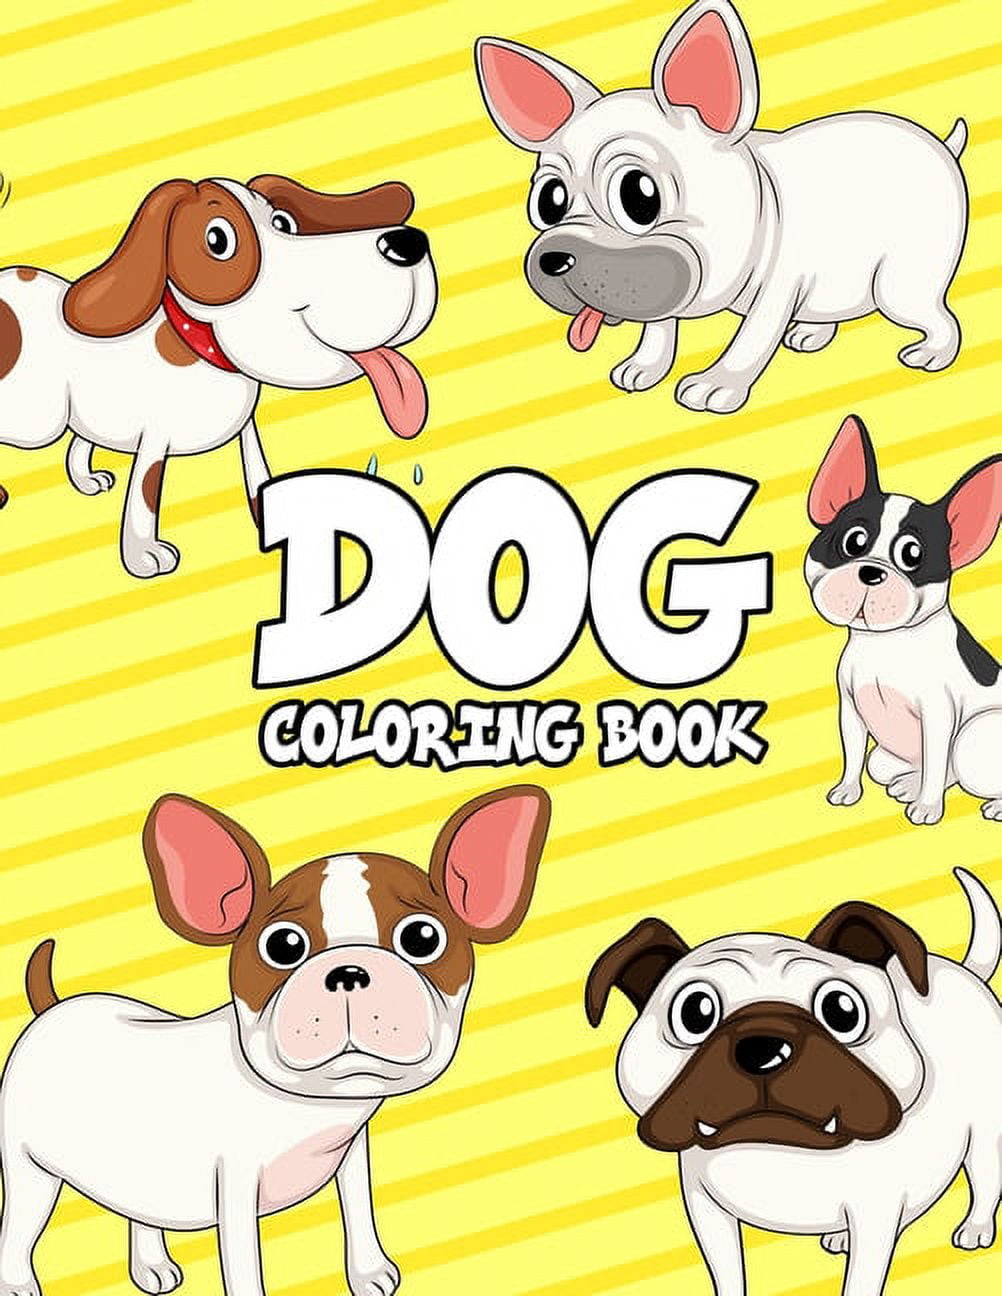 Girls　Relaxing　Pages　Dogs:　and　Dogs,　Collection　Dog　Dogs　Book　Animal　Dog　Of　Kids:　Coloring　Coloring　Kids,　Book　(Cute　Pages　for　Coloring　A　For　Really　Dogs,　Coloring　Boys,　Silly　For　Little